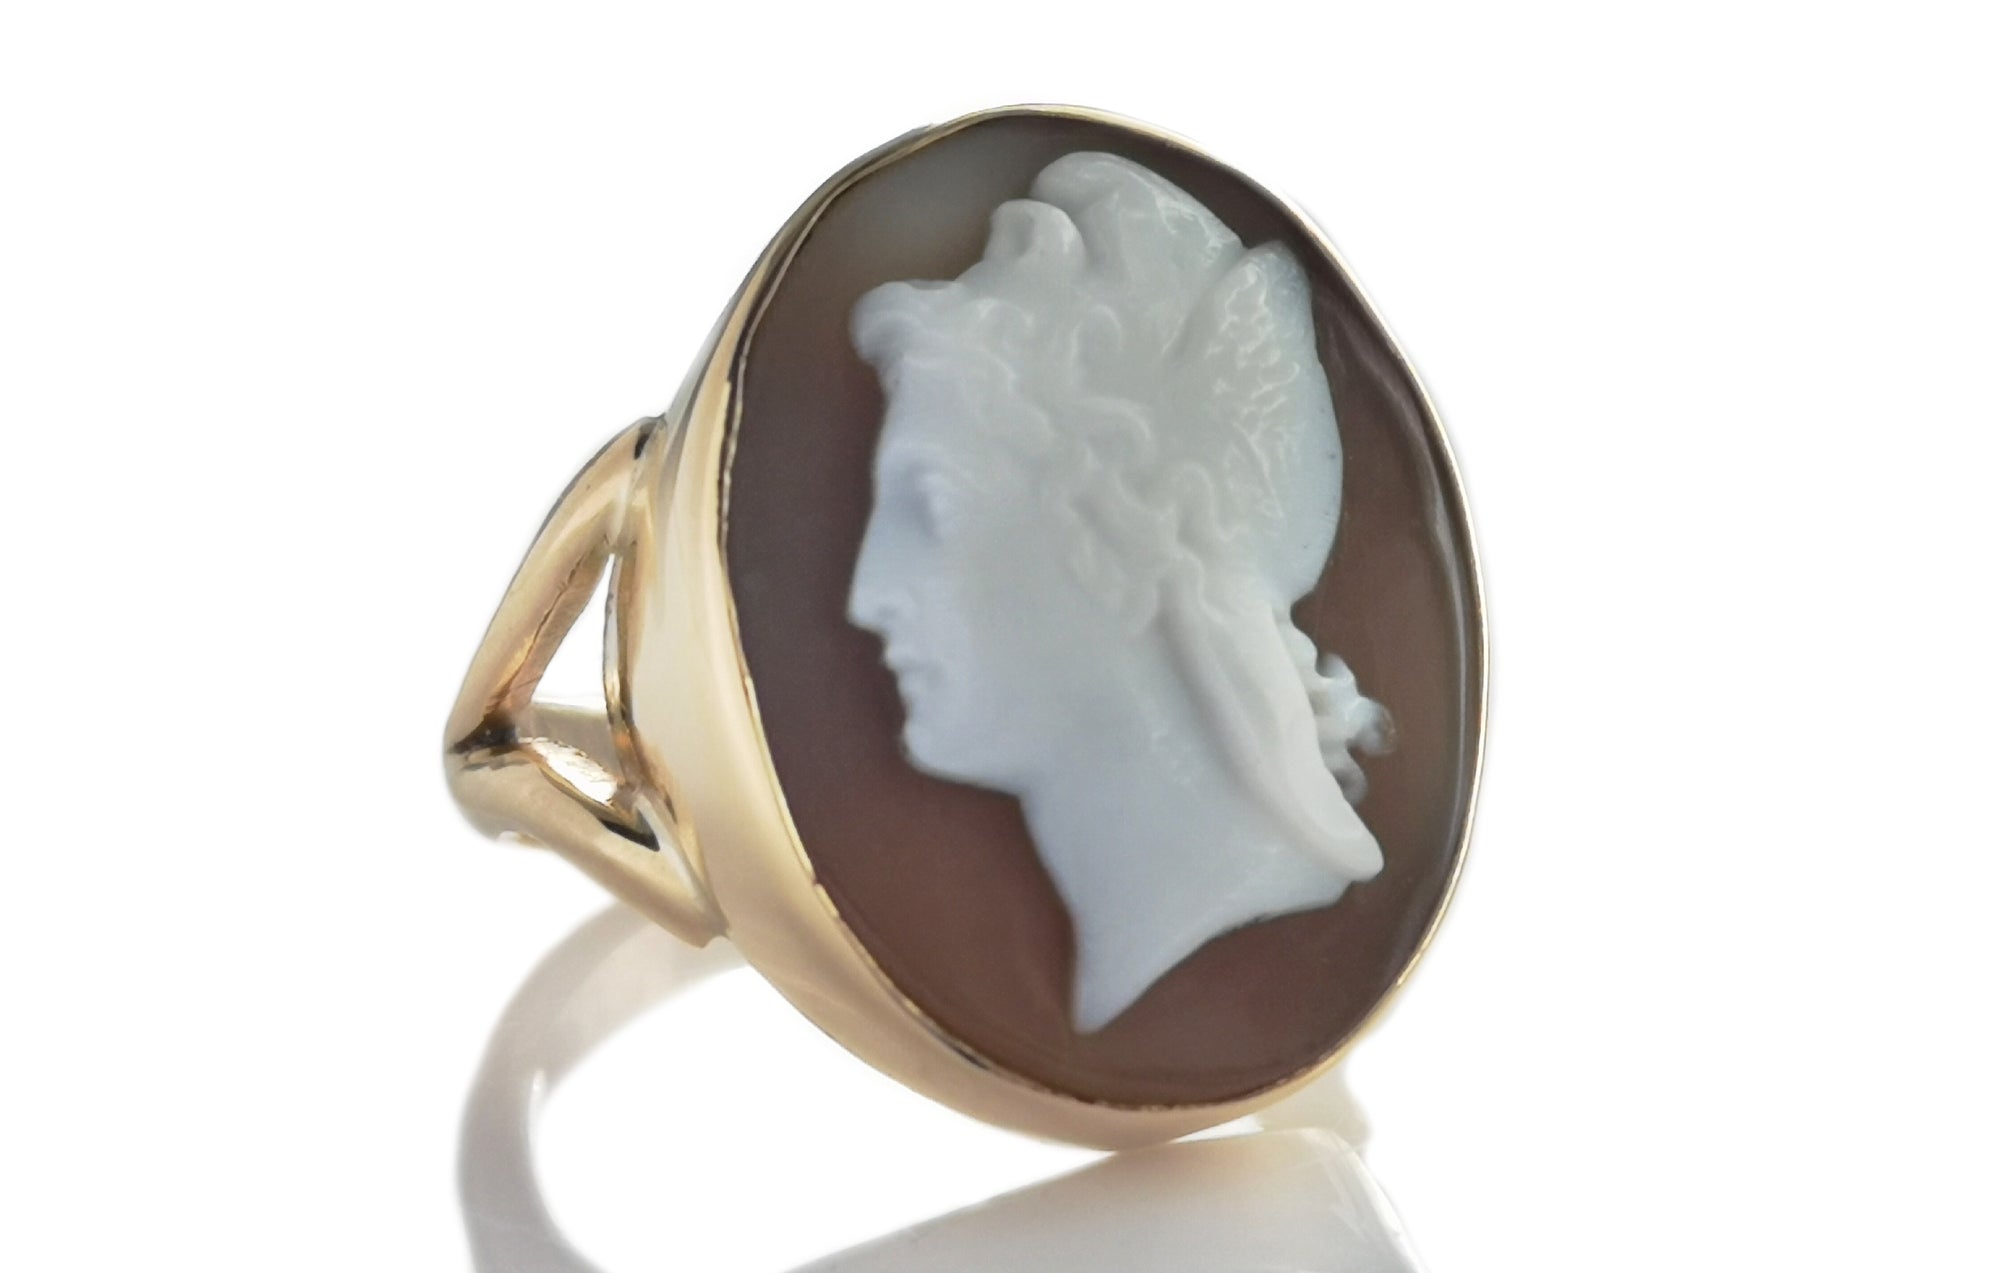 Antique 19th Century Ganymede Cameo Ring in Gold